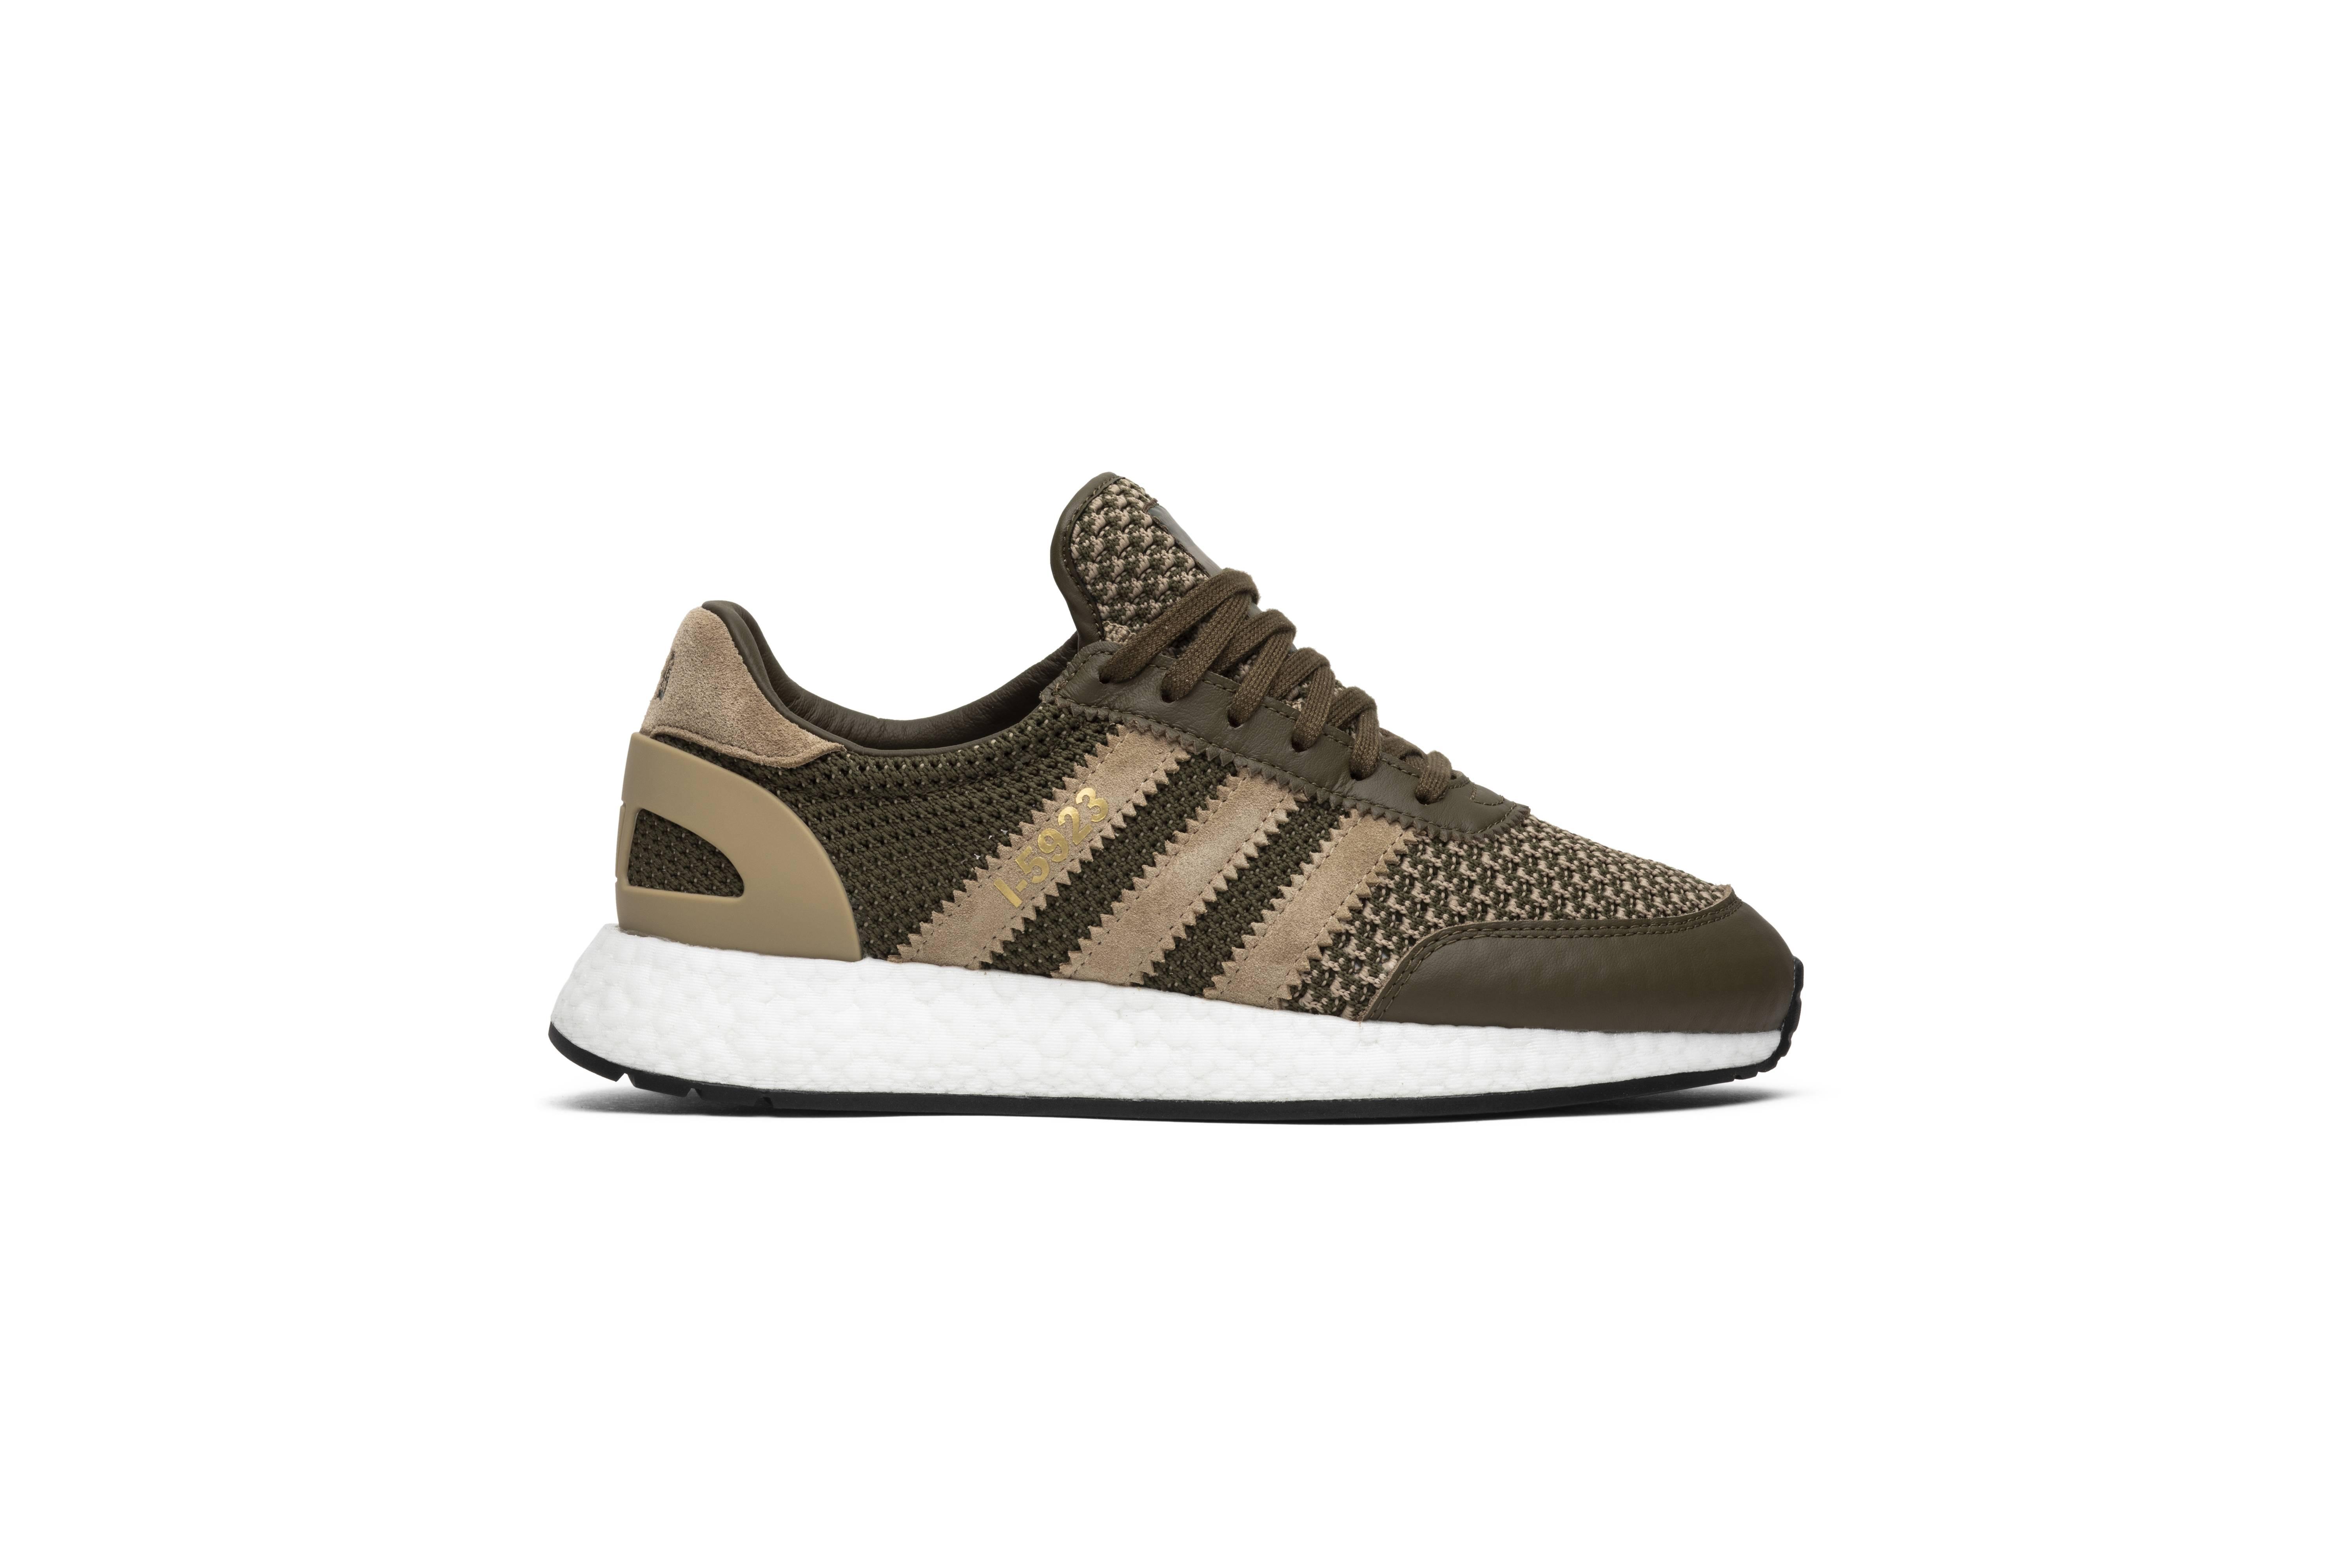 Adidas I 5923 Tan Outlet Shop, UP TO 65% OFF